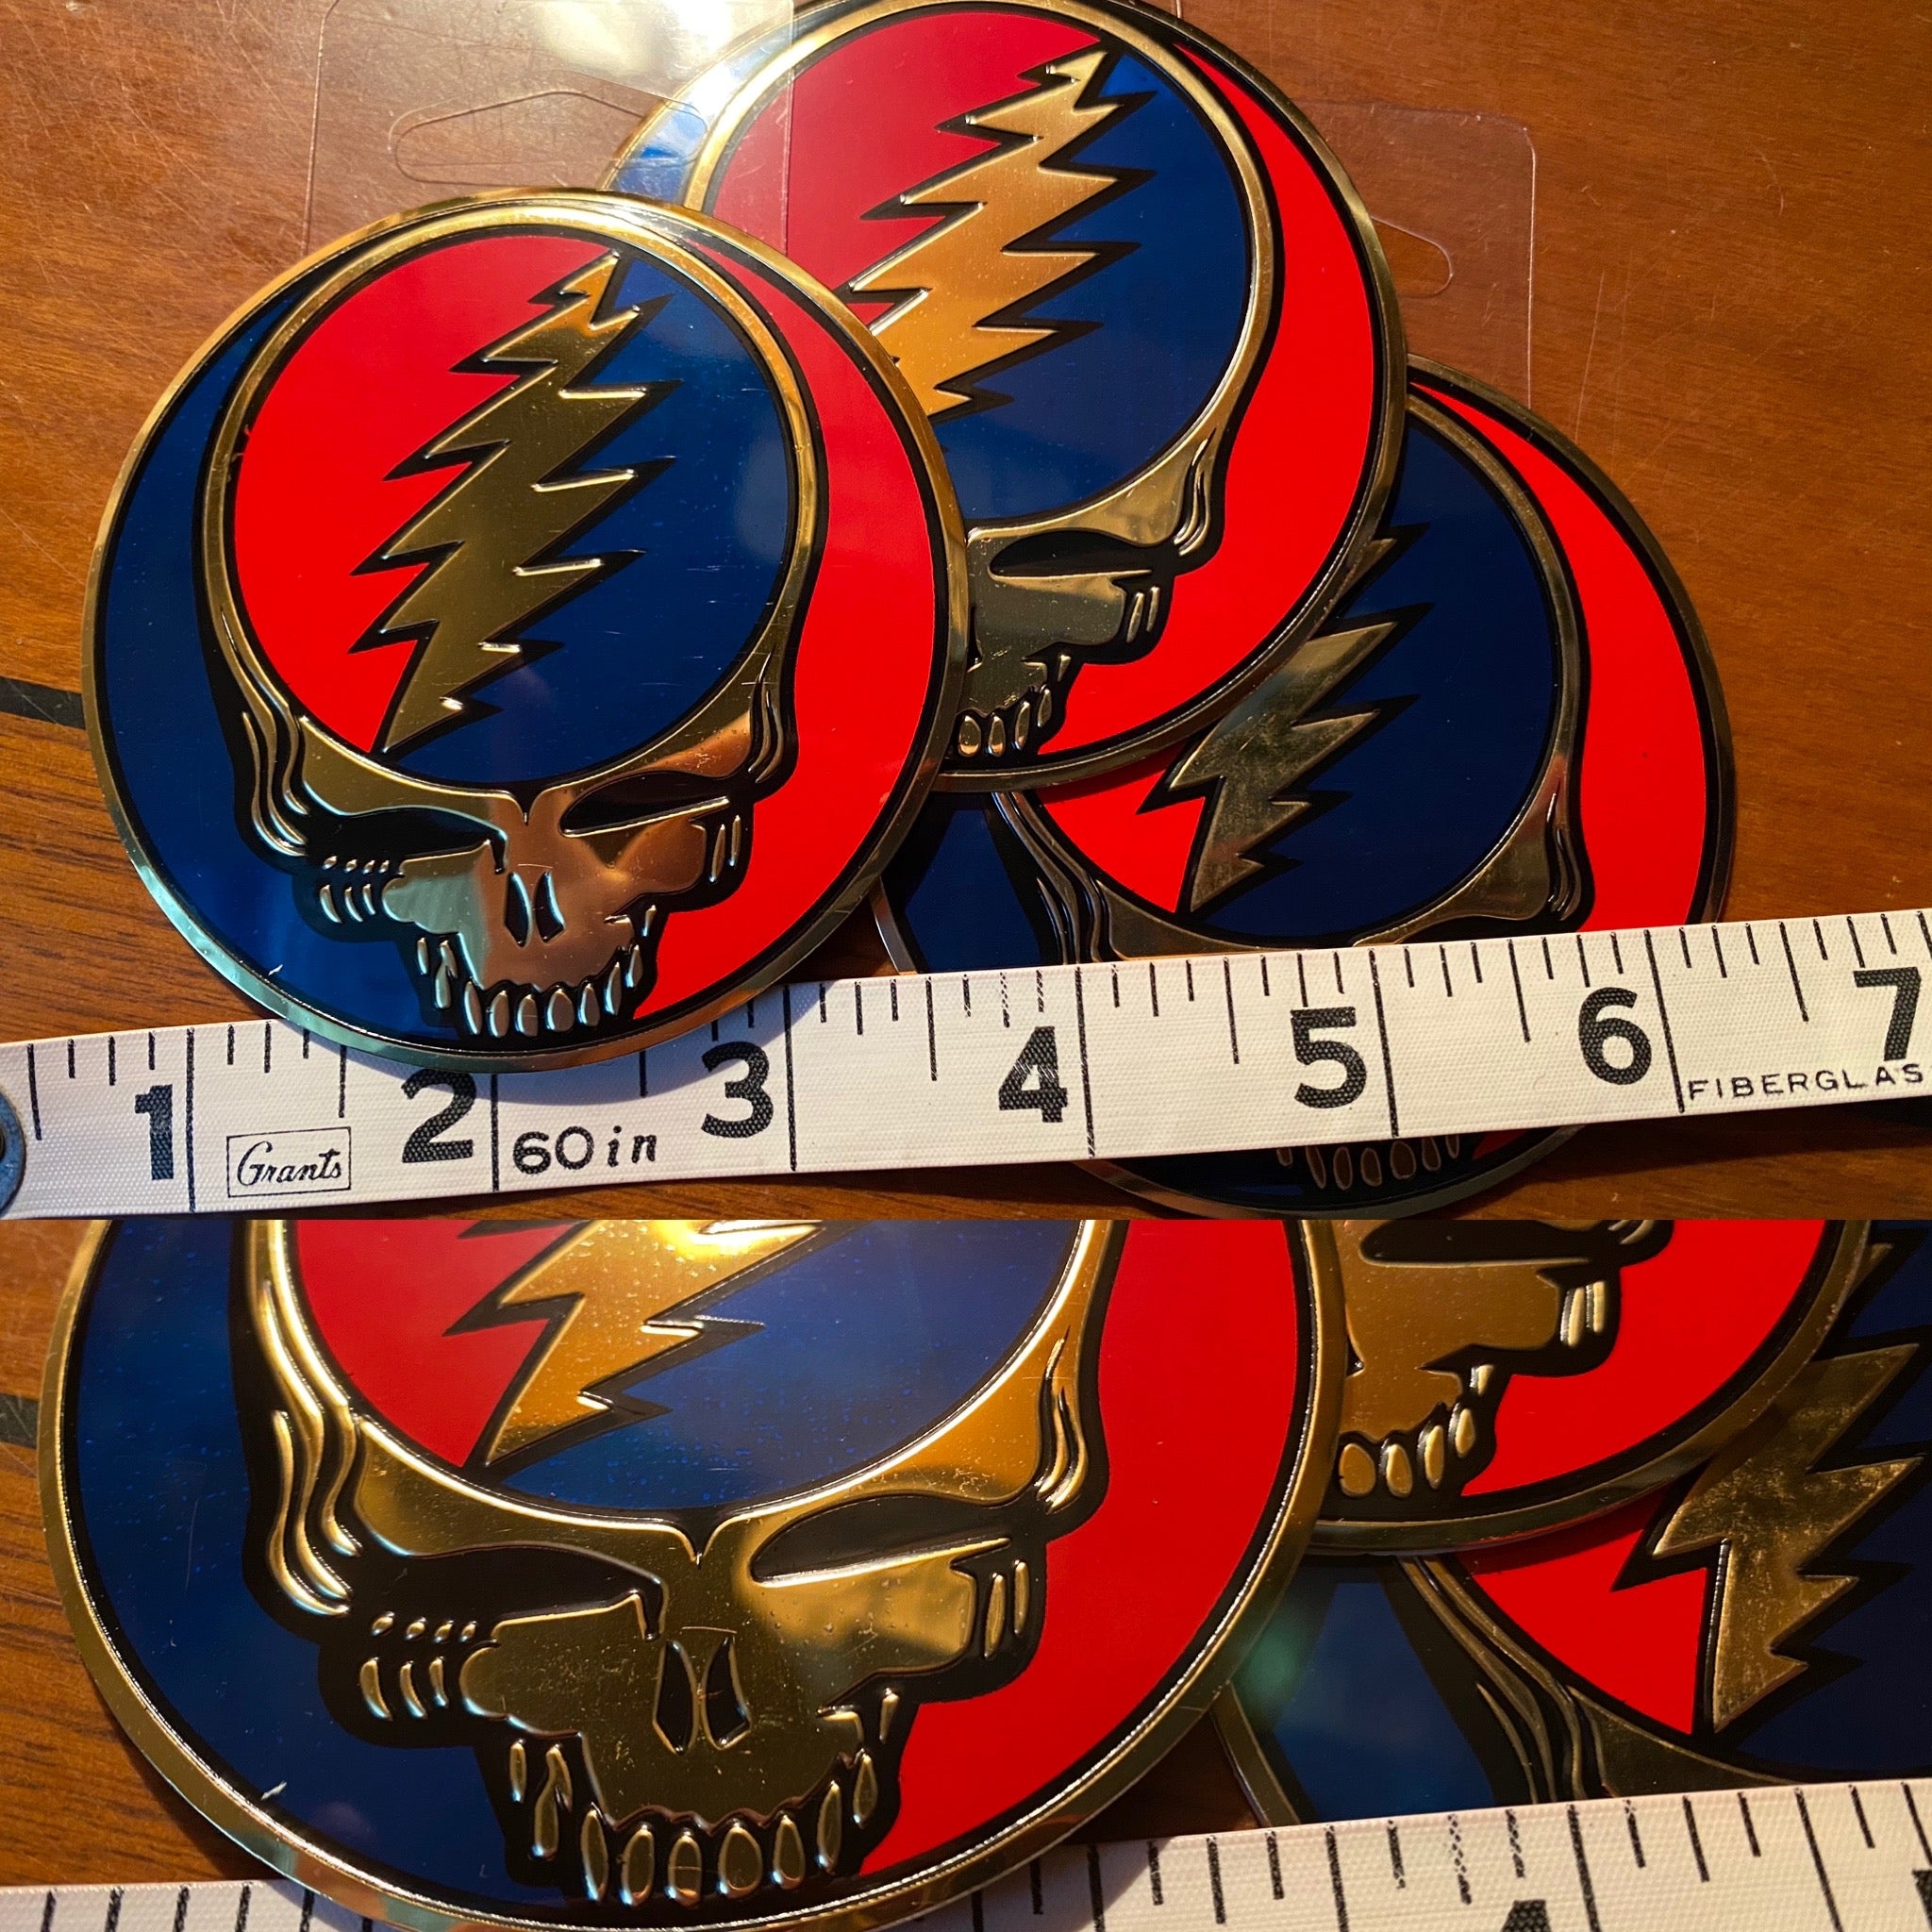 Steal Your Face Metal Sticker Decal 3"